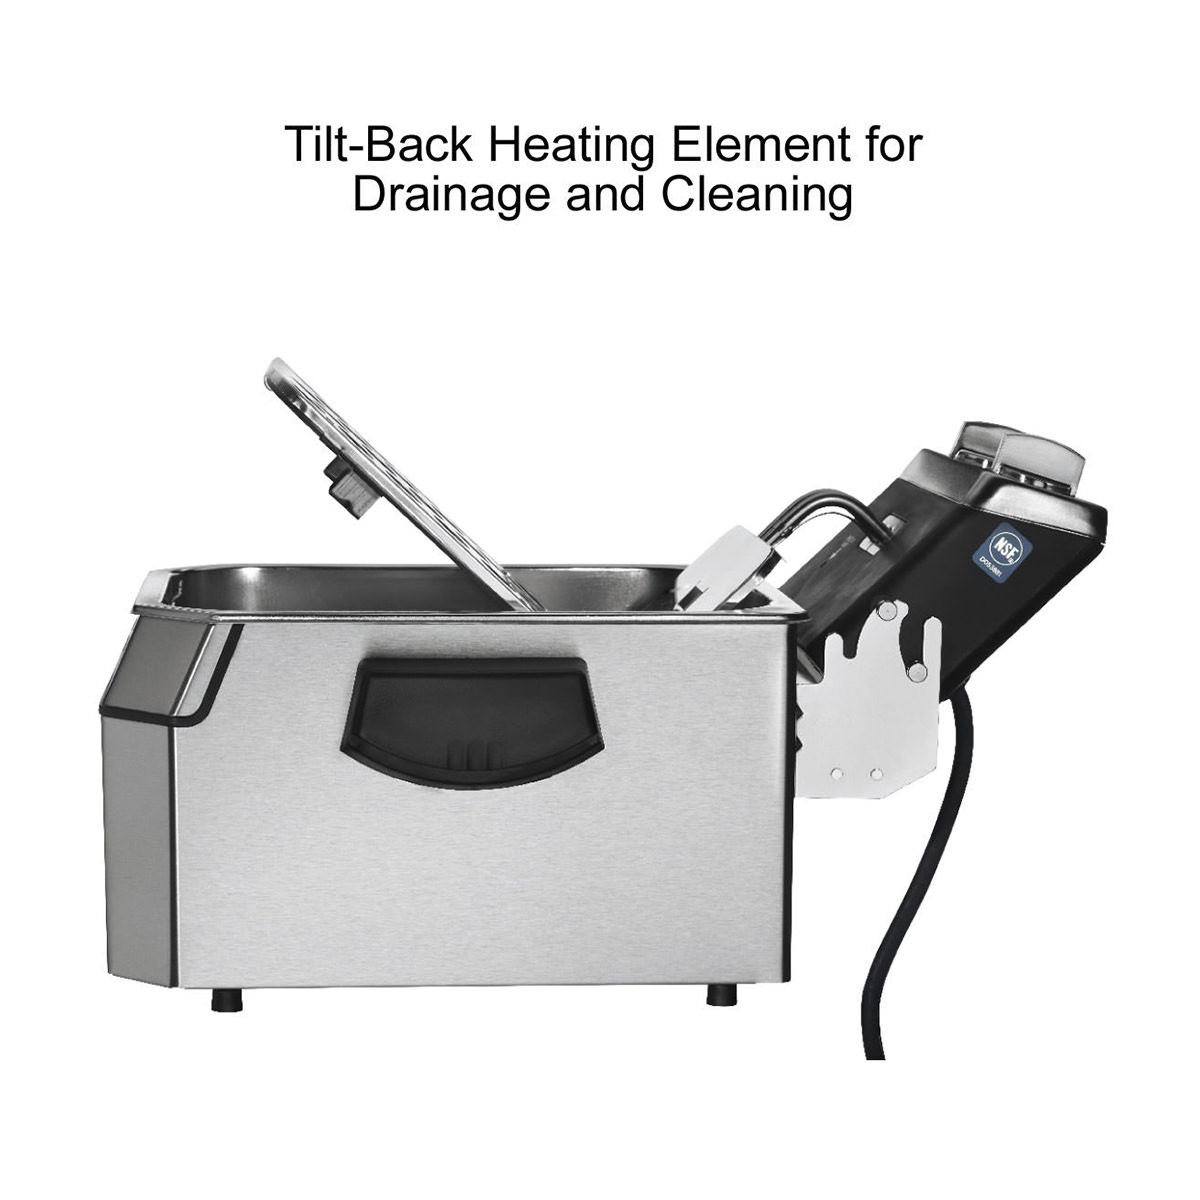 https://www.waringcommercialproducts.com/files/products/wdf1000-waring-deep-fryer-inset3.jpg